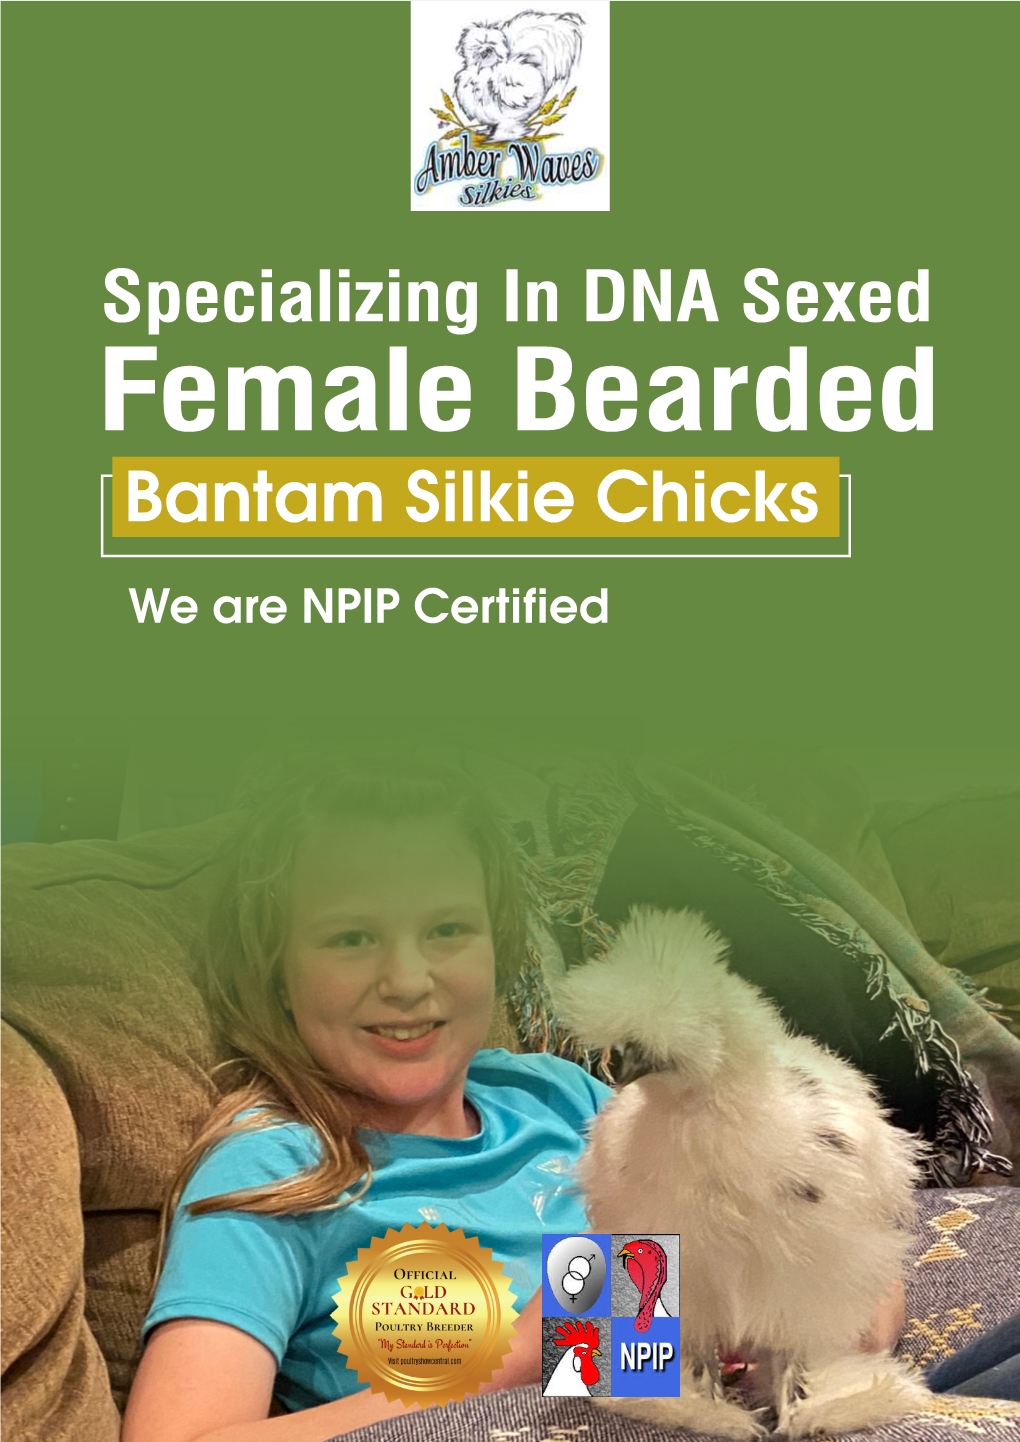 Specializing in DNA Sexed Female Bearded Bantam Silkie Chicks We Are NPIP Certified SILKIE CHICKENS MAKE GREAT ADDITIONS to EVERY HOME